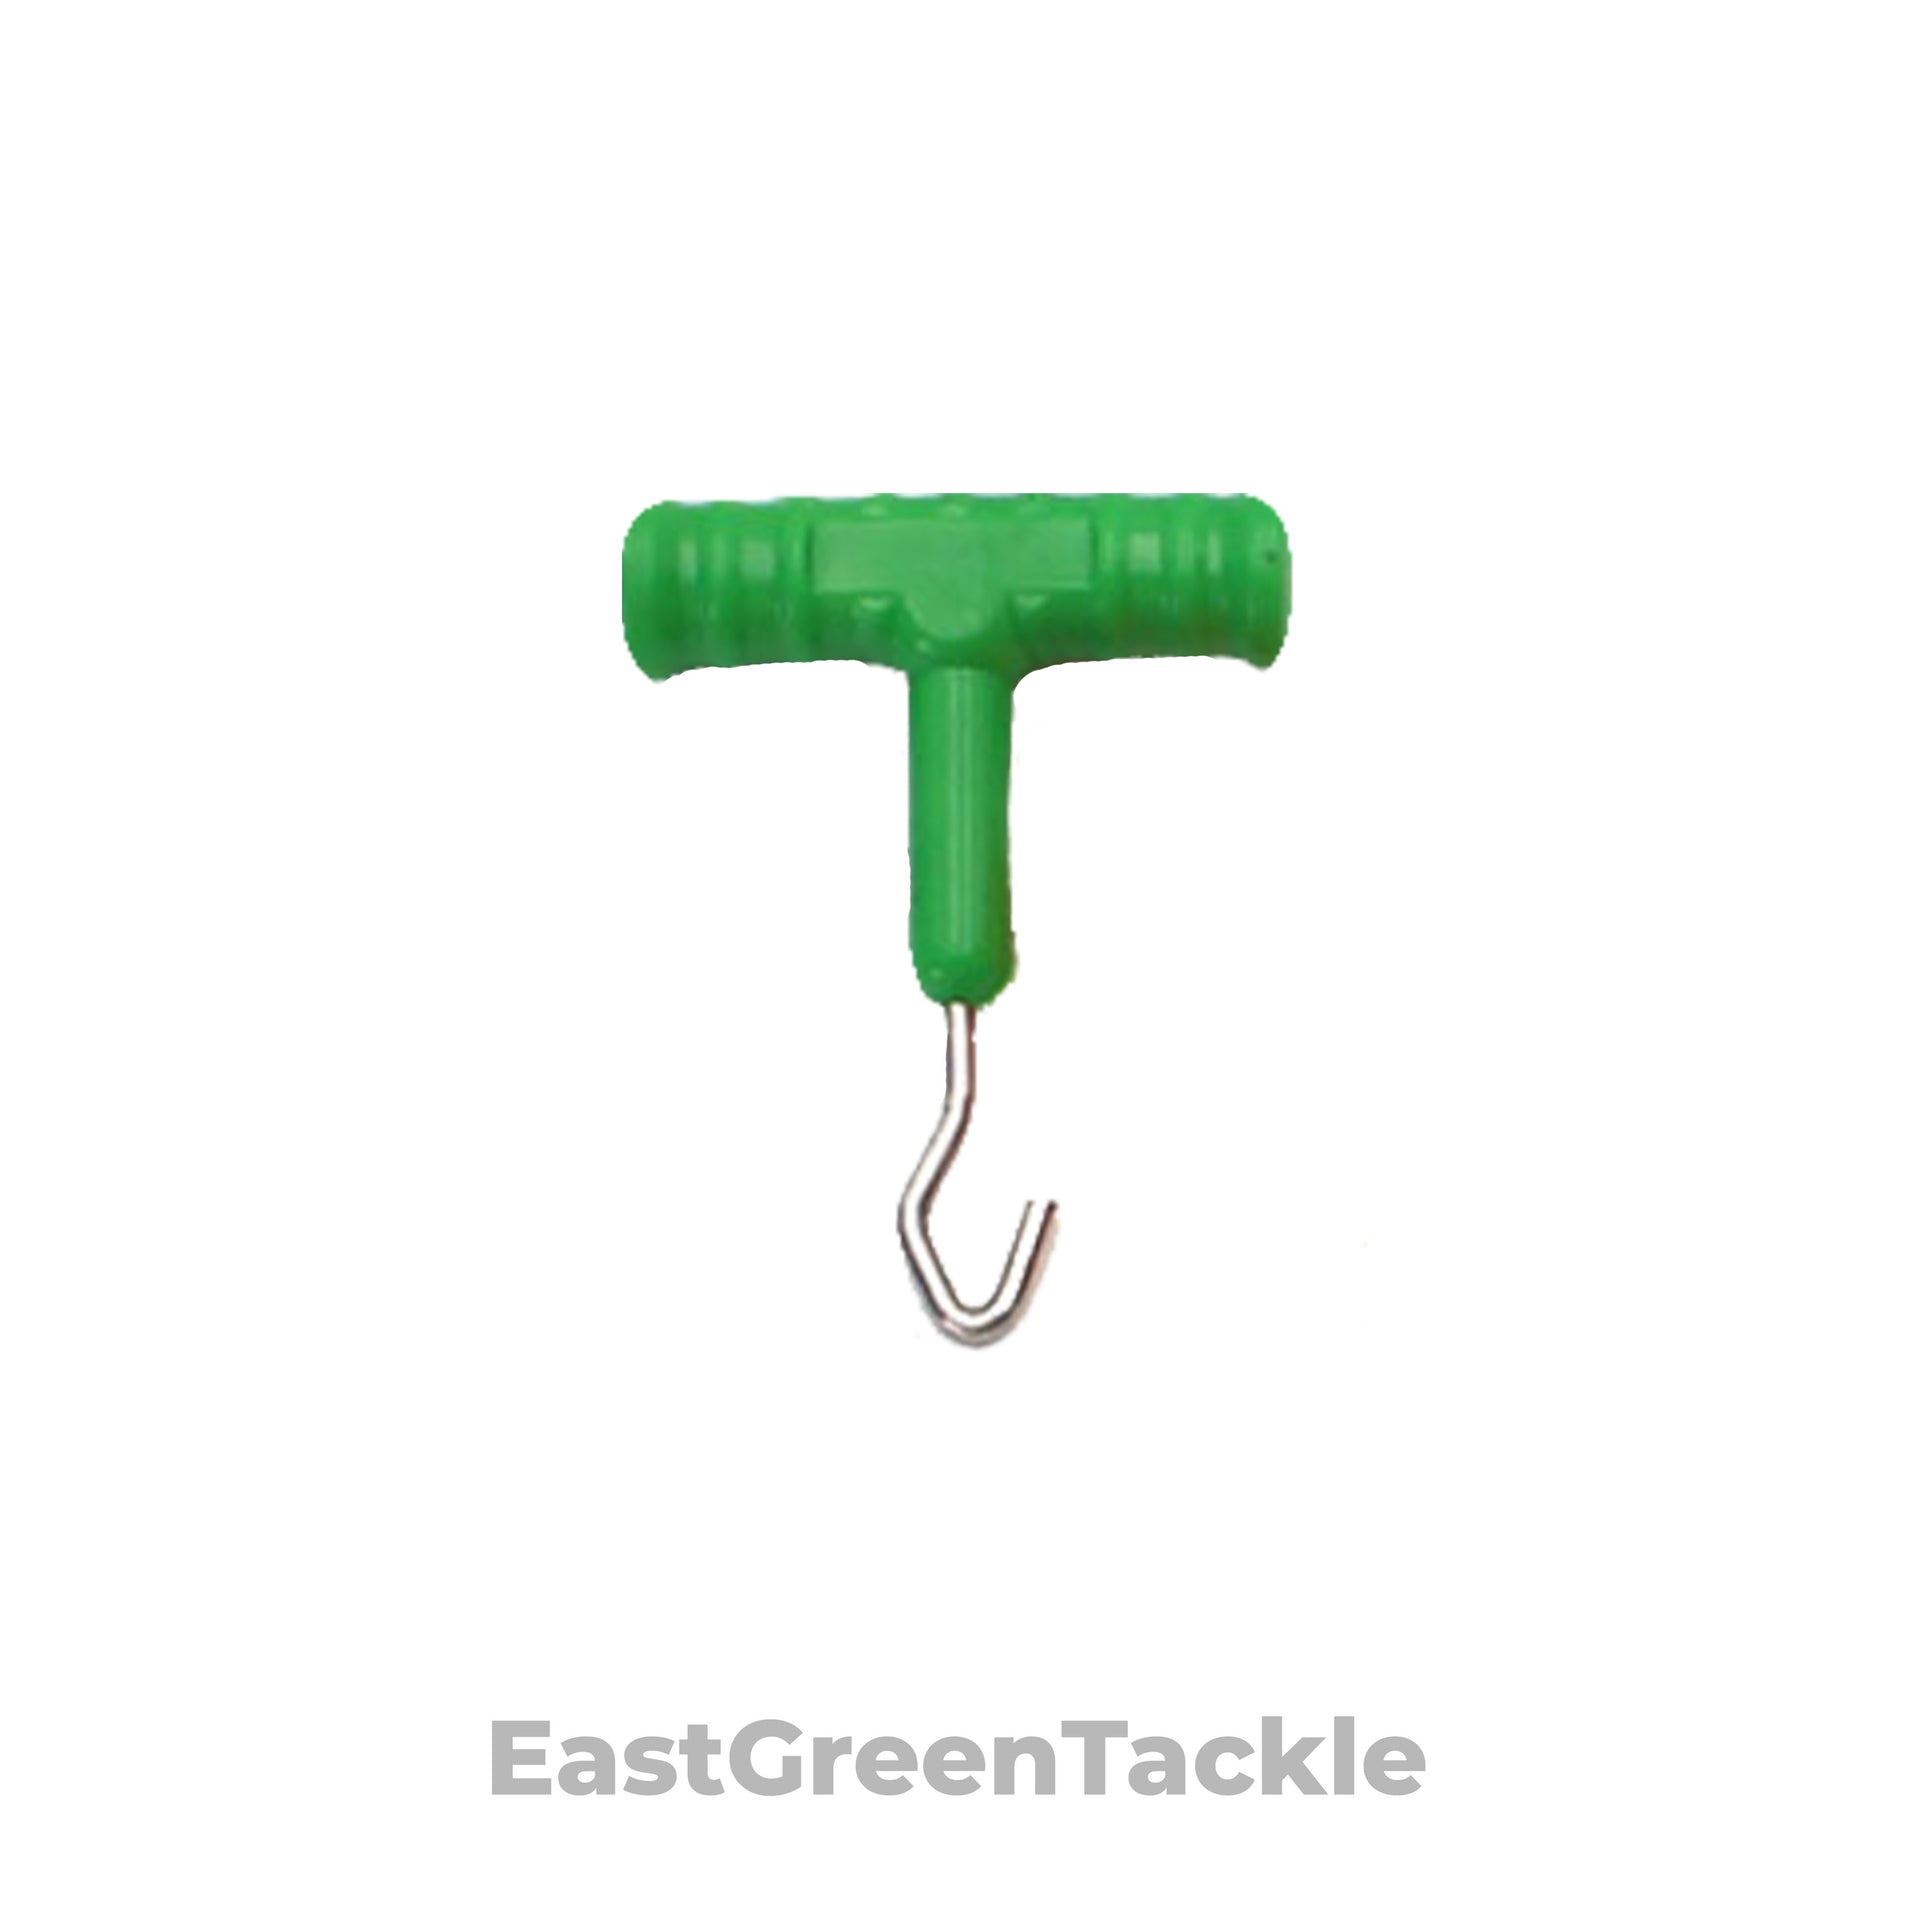 KNOT PULLER – East Green Tackle